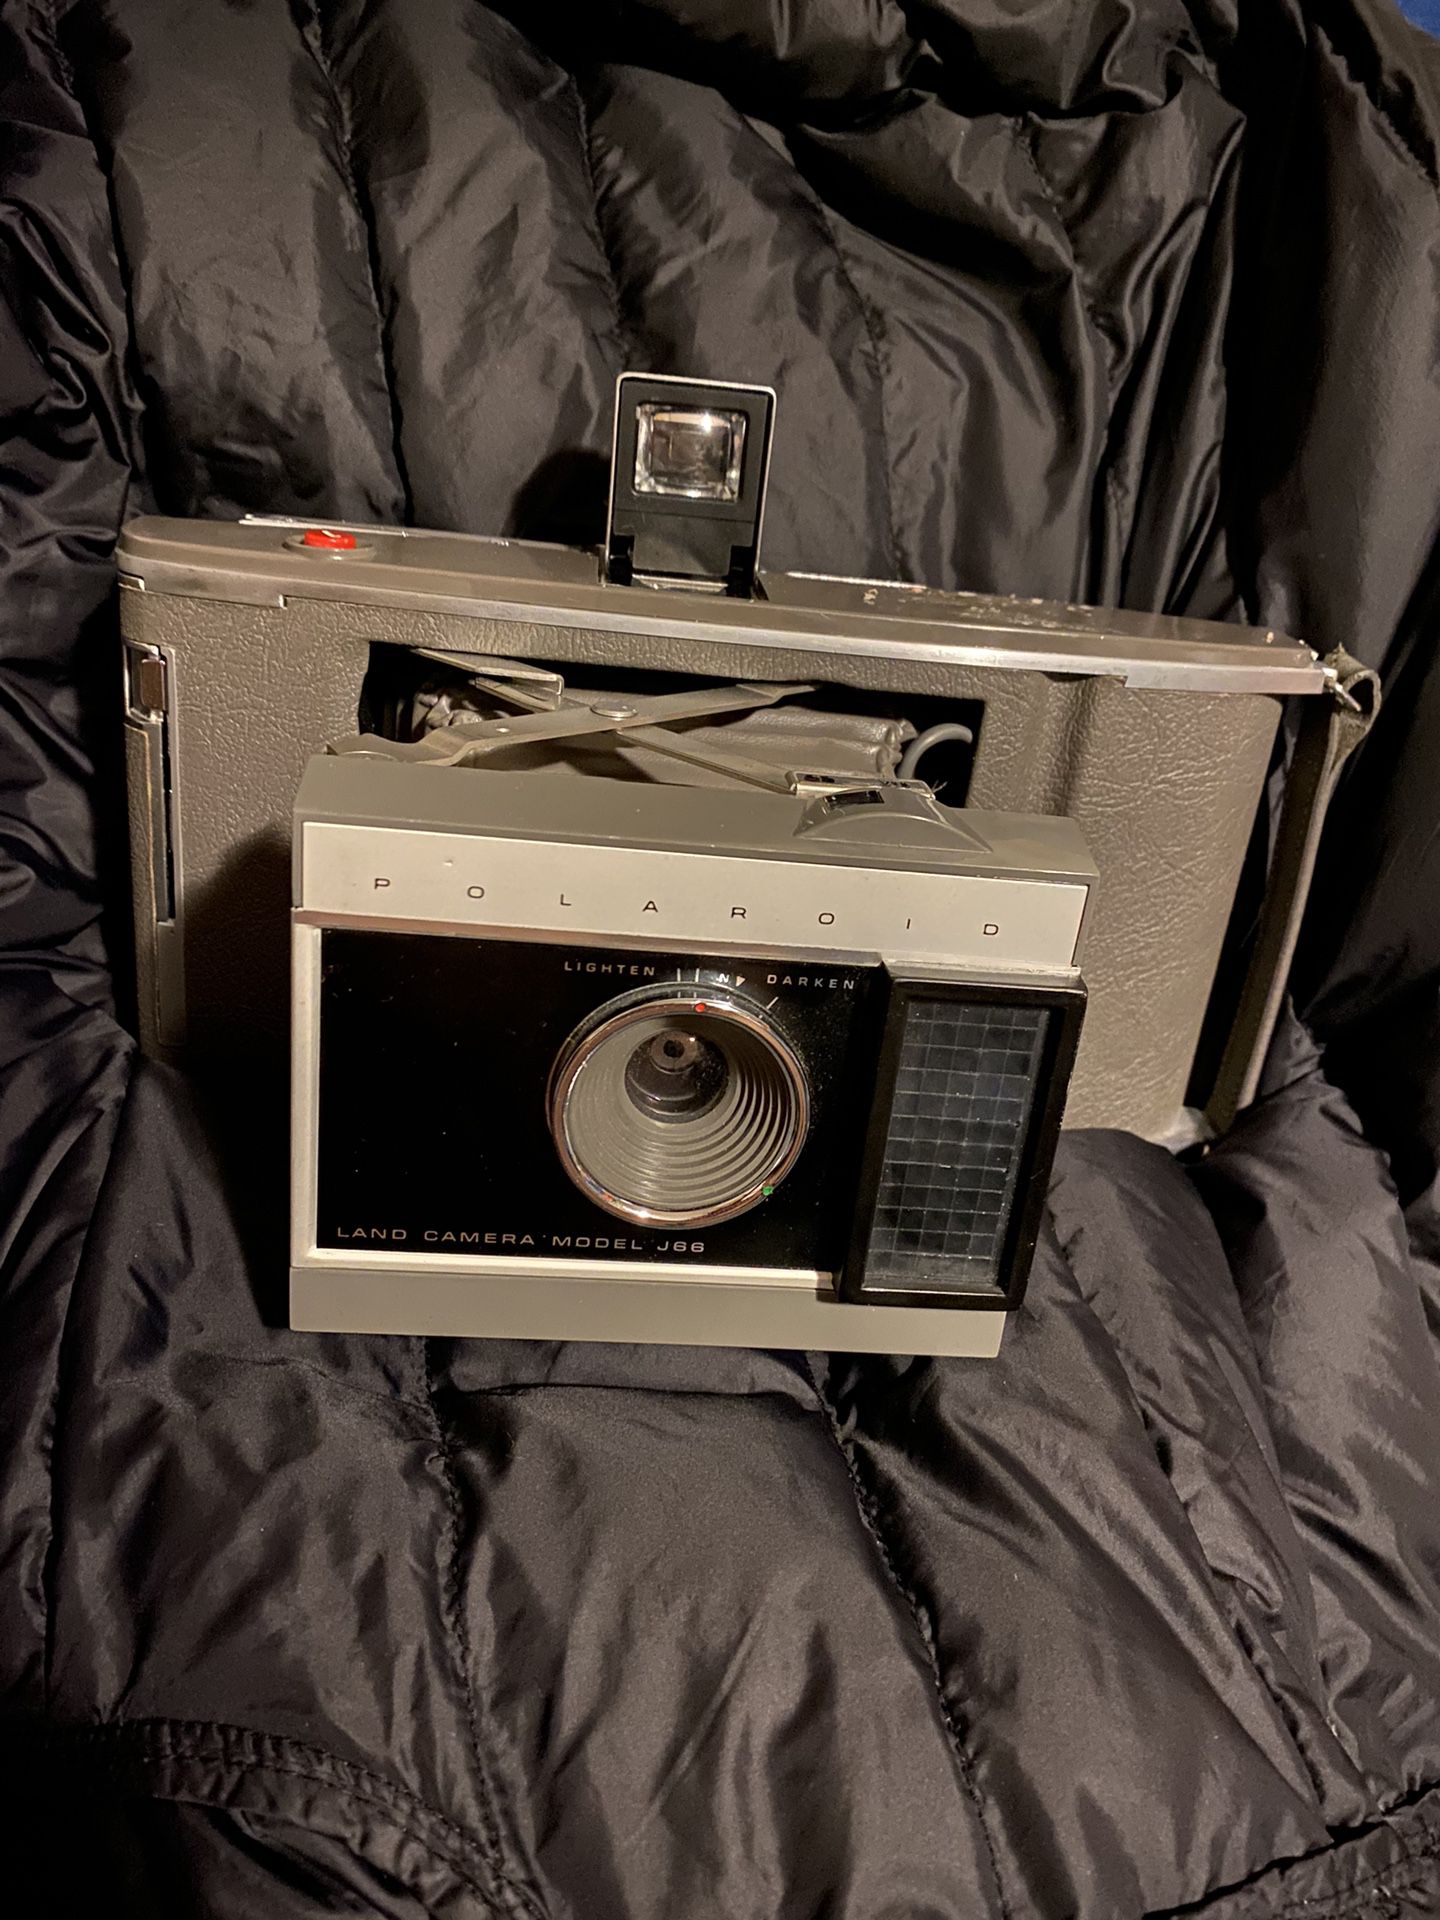 Polaroid Land Camera J66- From 1(contact info removed) Vintage Antique Instant Camera No film 